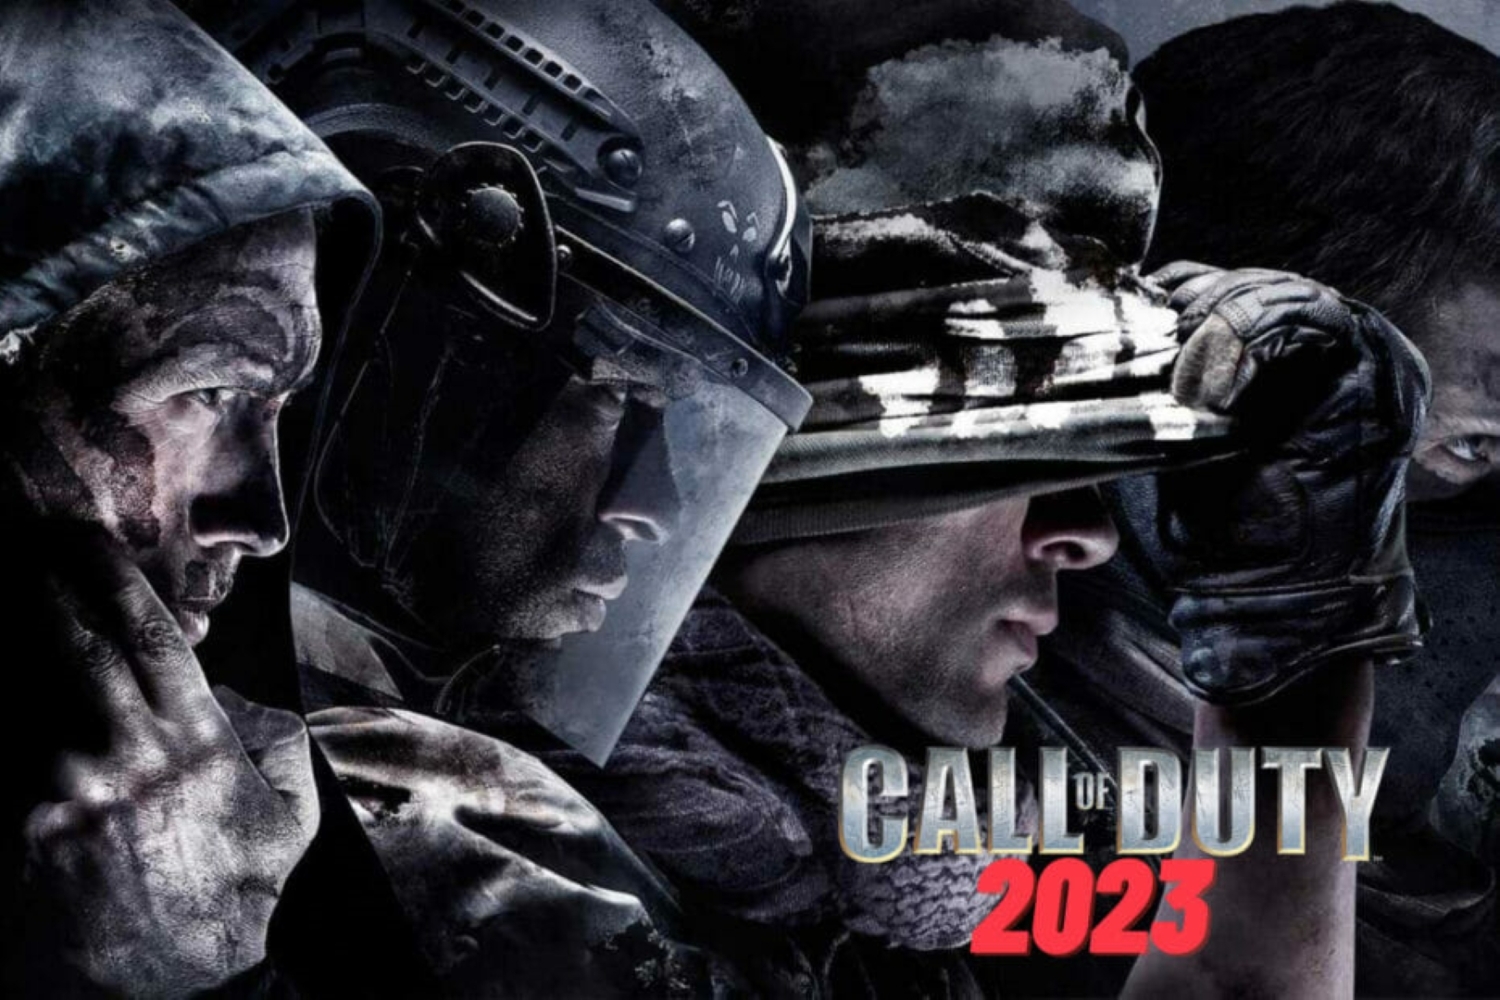 Call of Duty 2023 rumor delayed, first year without COD since 2004